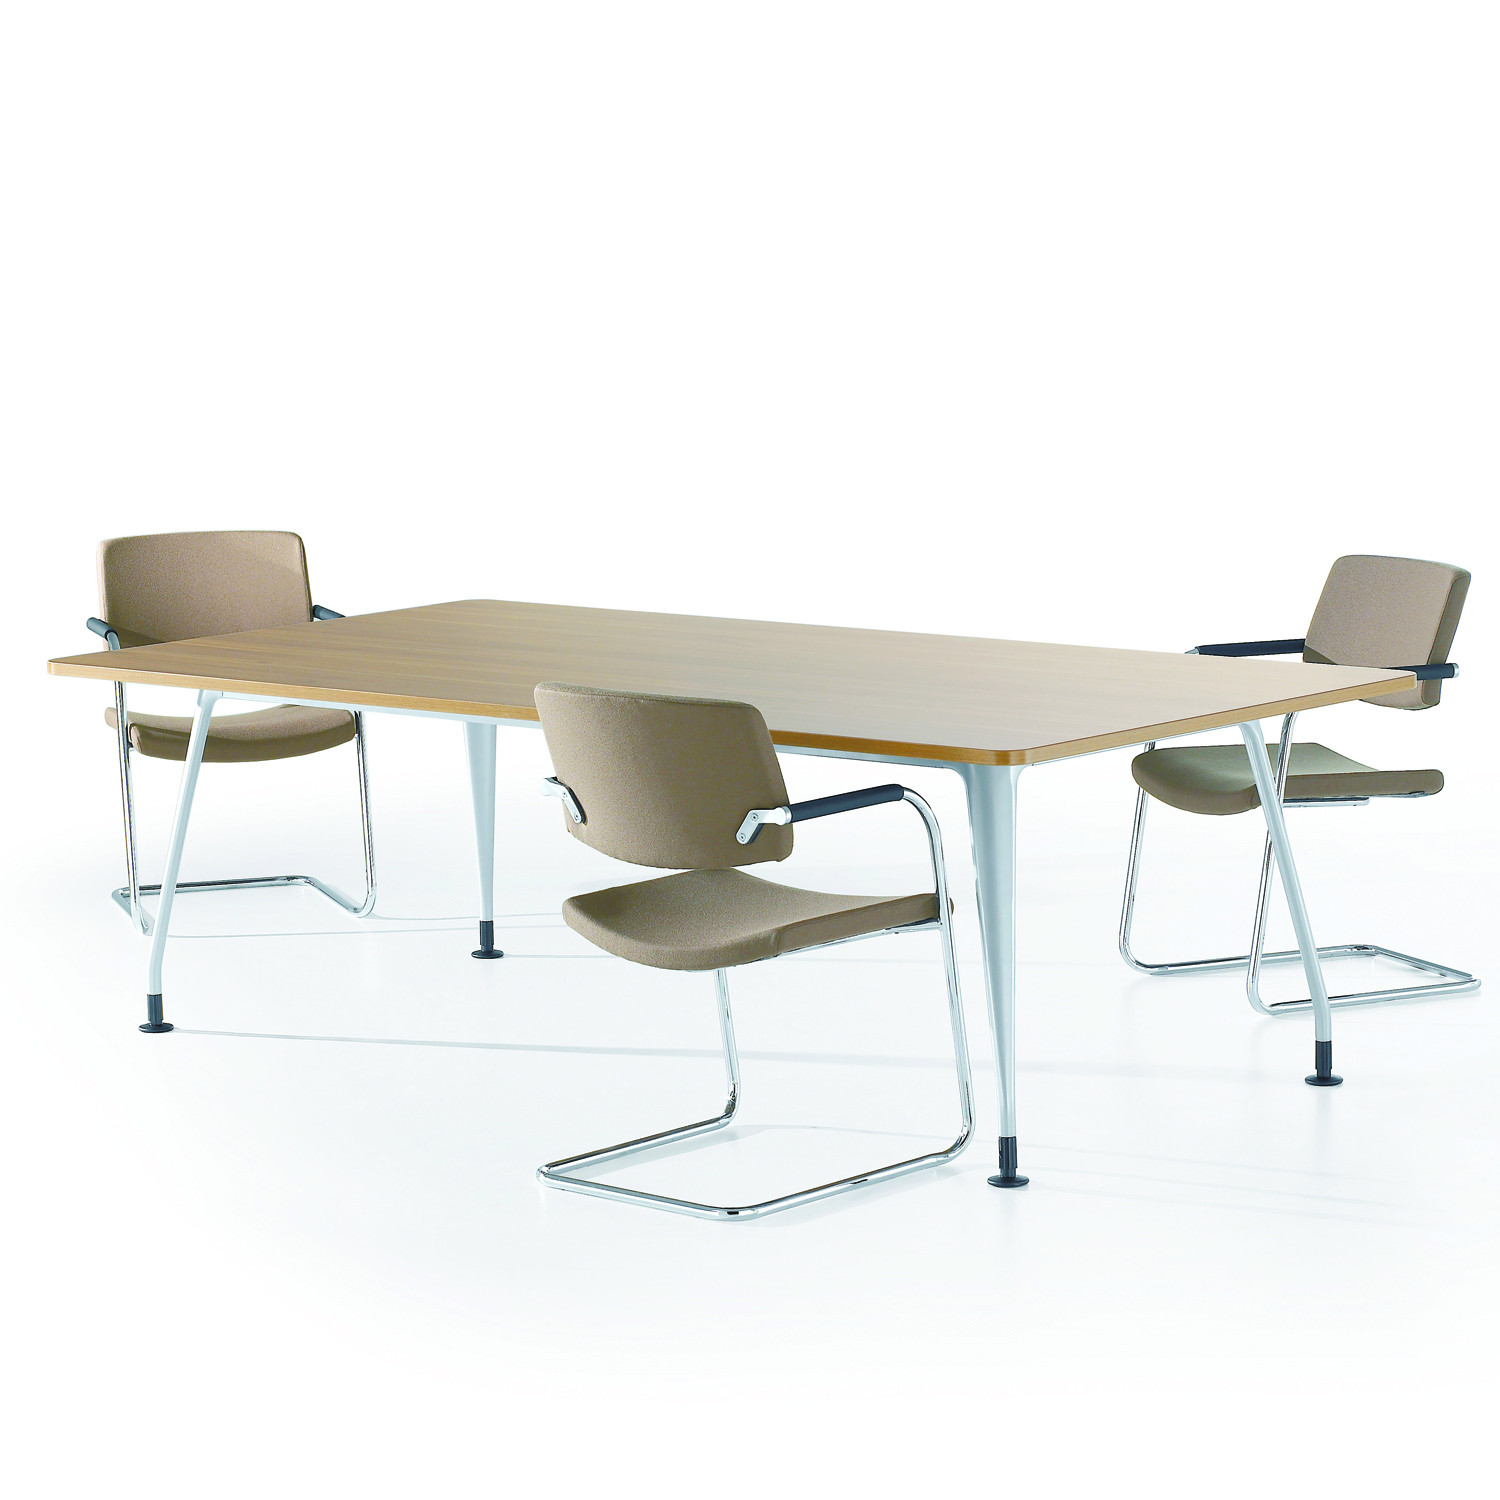 DNA Meeting Table